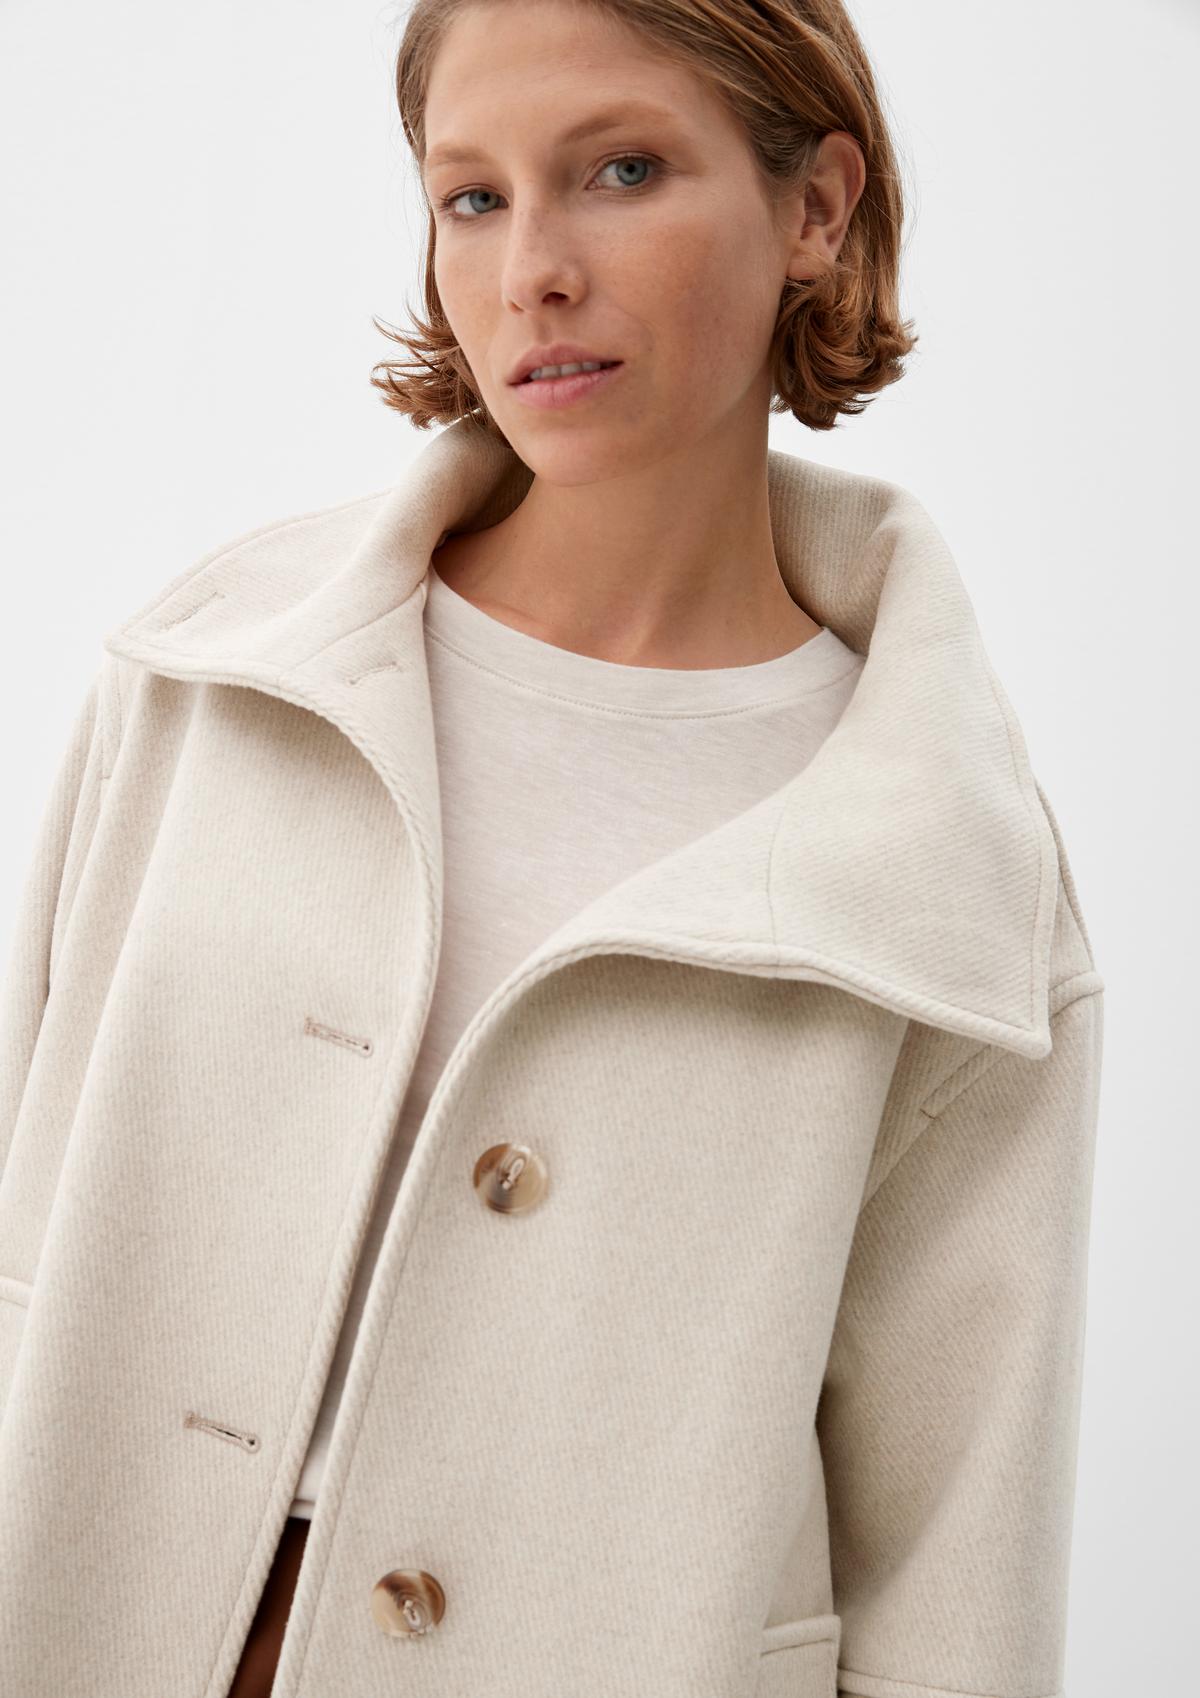 s.Oliver Wool blend coat with turn-down collar